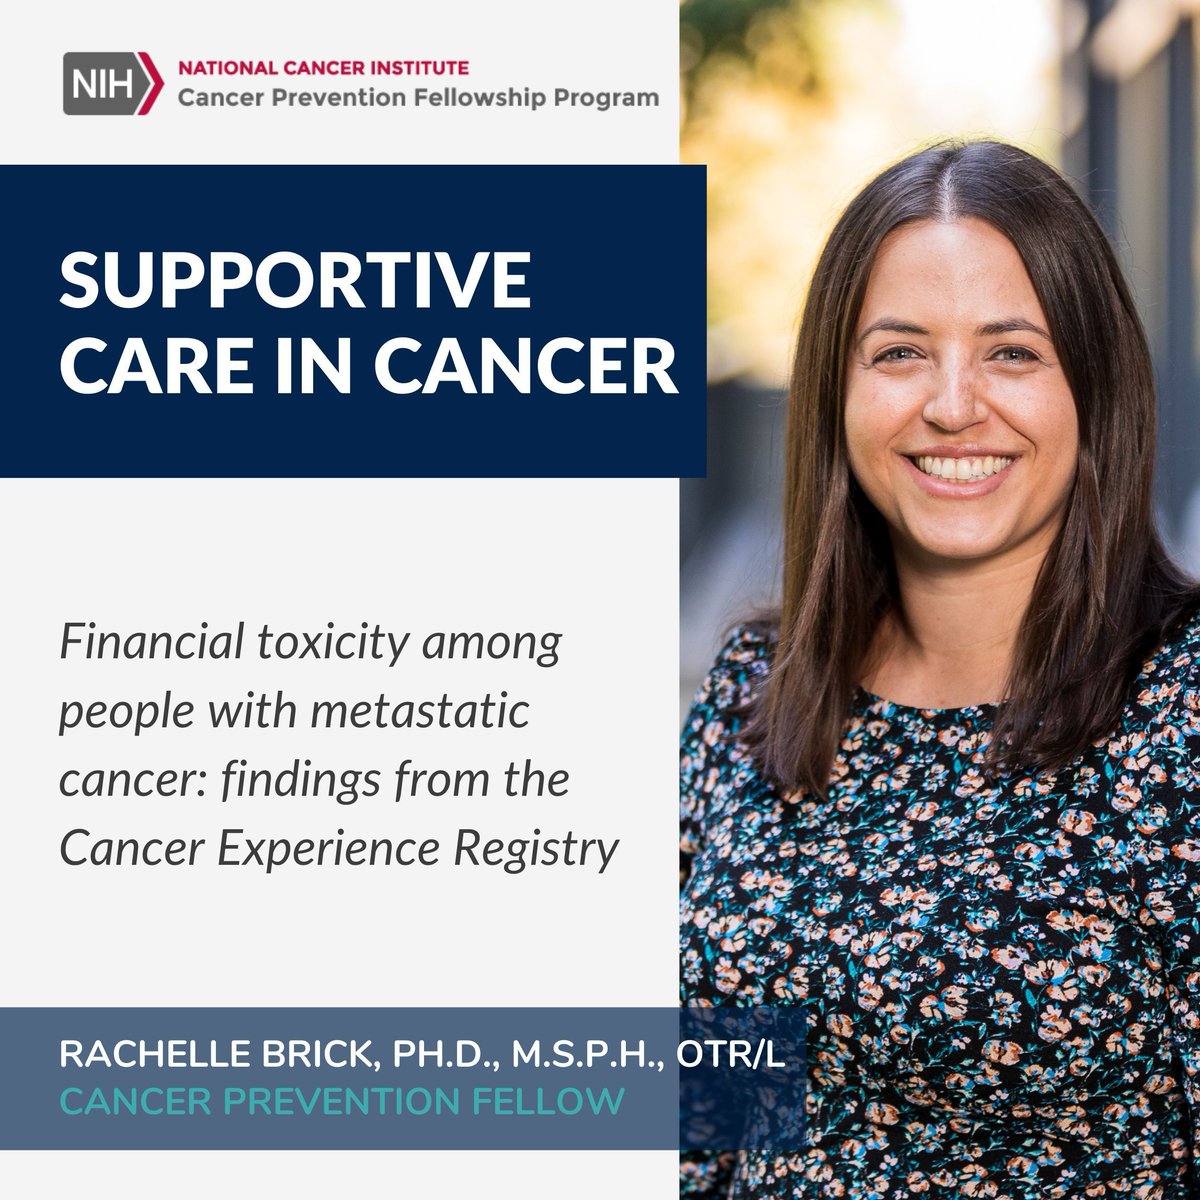 Fellow Dr.@rachelle-brick published research in Supportive Care in Cancer showing over 50% of people with metastatic cancer report #financialtoxicity.leading to postponing some care. buff.ly/3IFrPcK